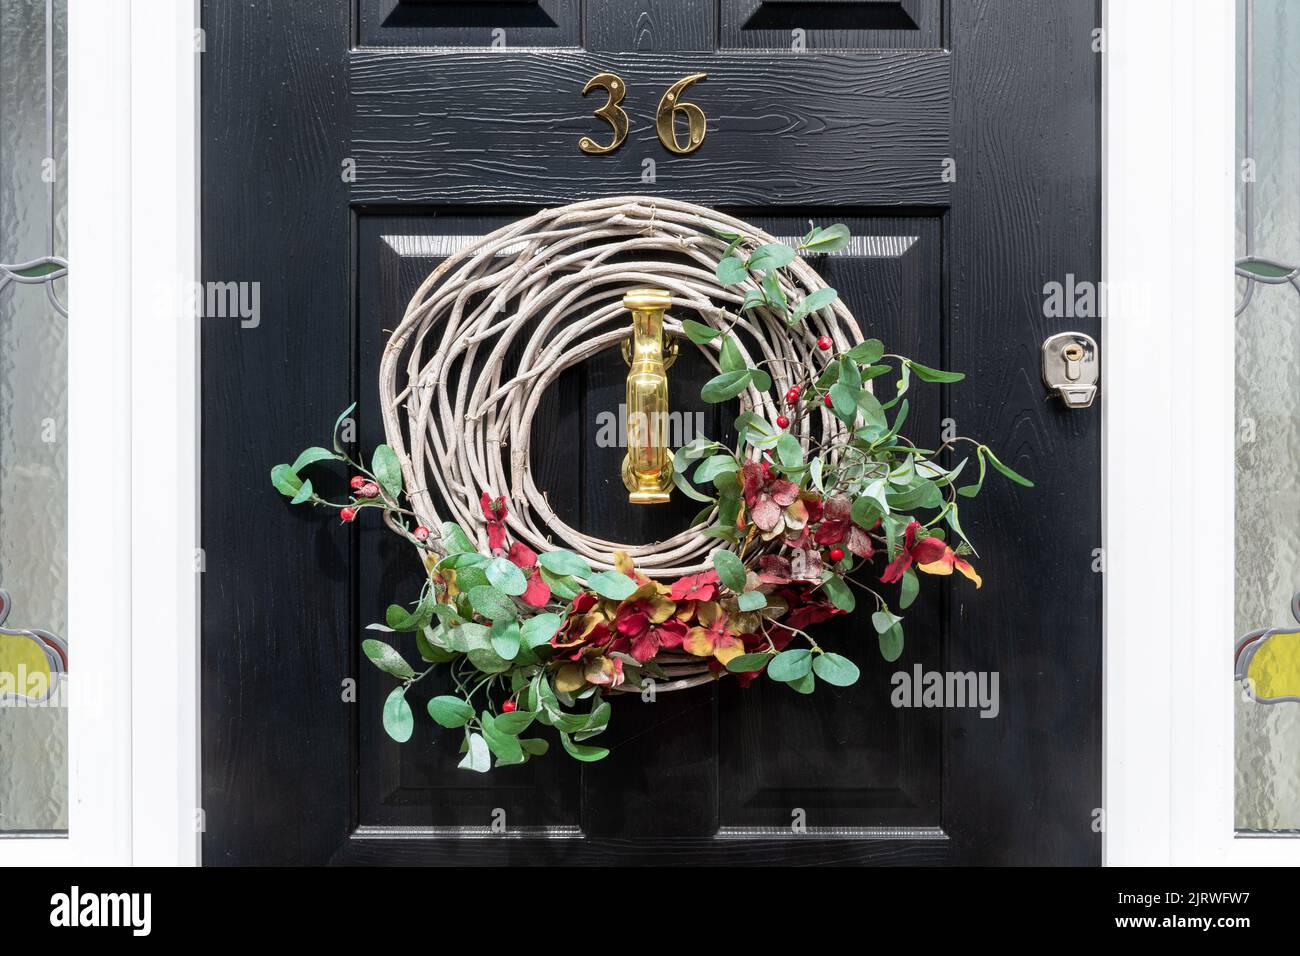 Wreath on front door with red flowers and green leaves or foliage, decorative wreath Stock Photo